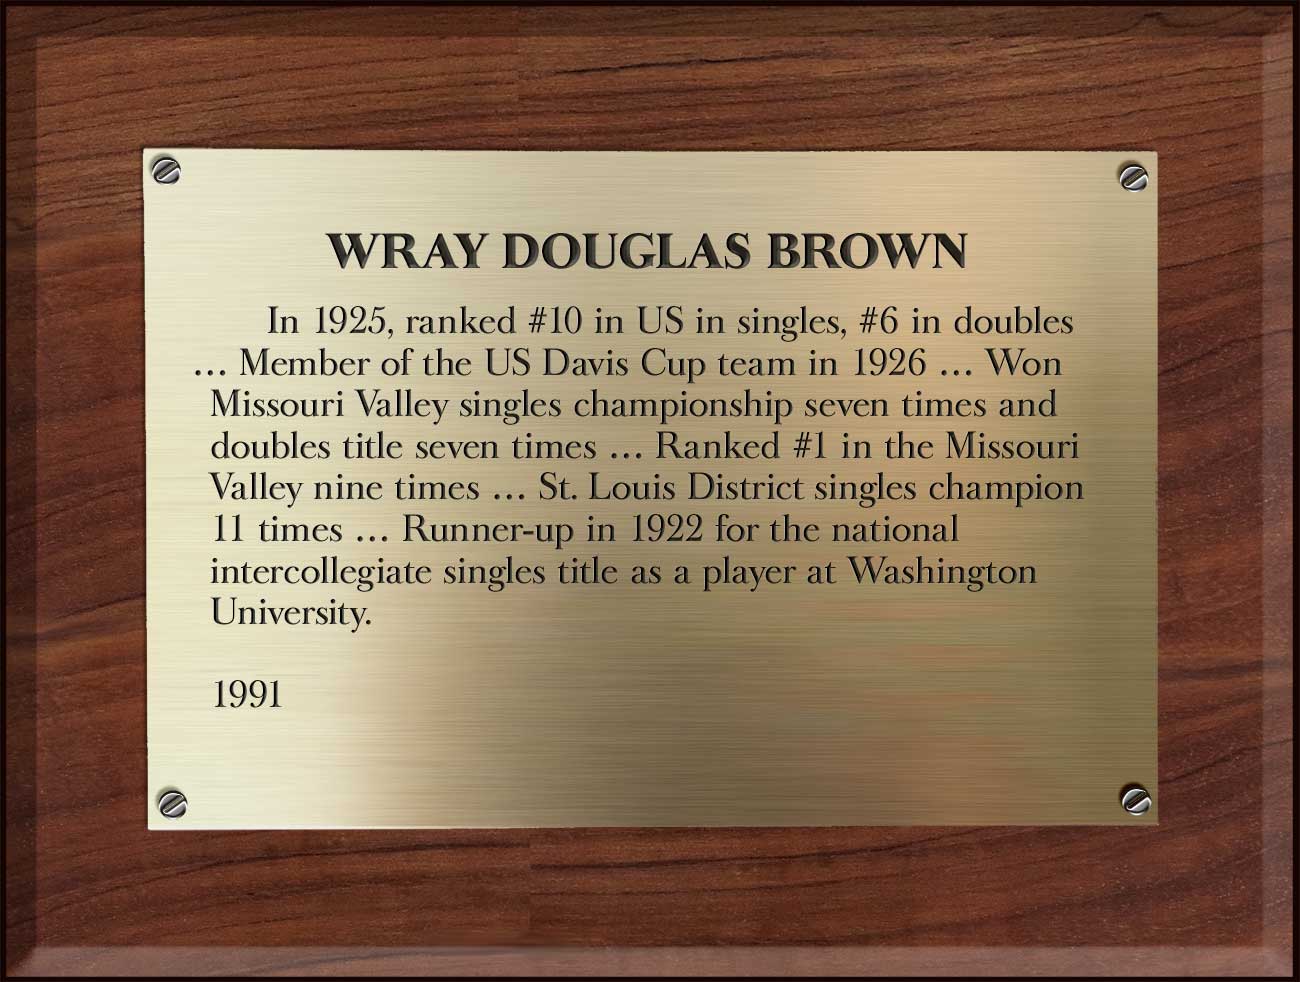 Wray D. Brown